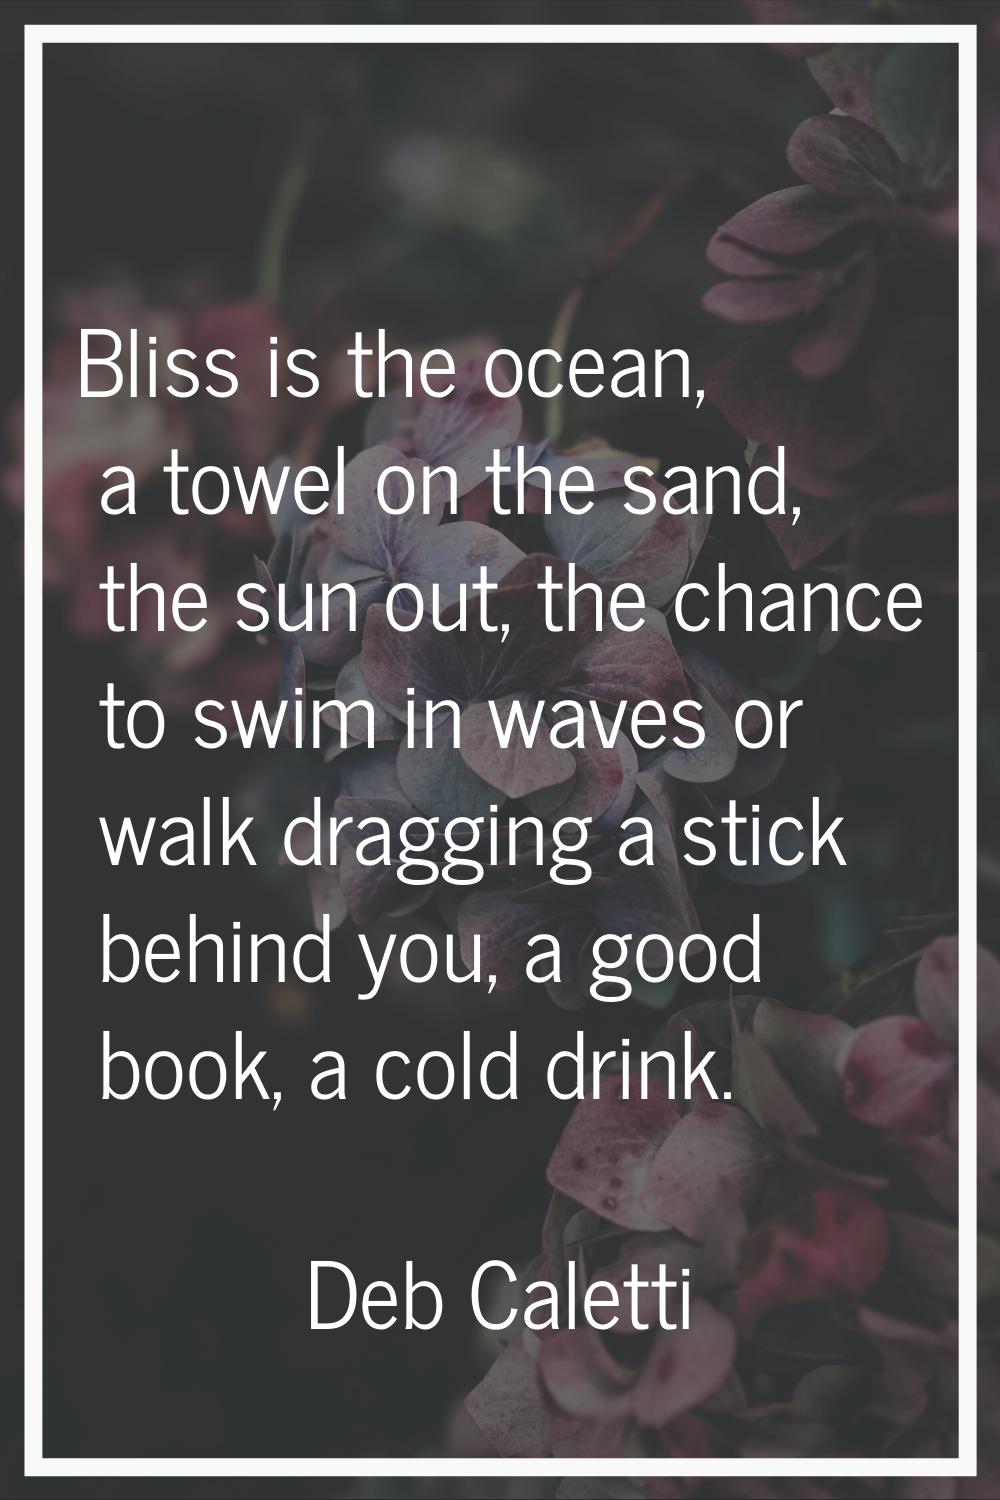 Bliss is the ocean, a towel on the sand, the sun out, the chance to swim in waves or walk dragging 